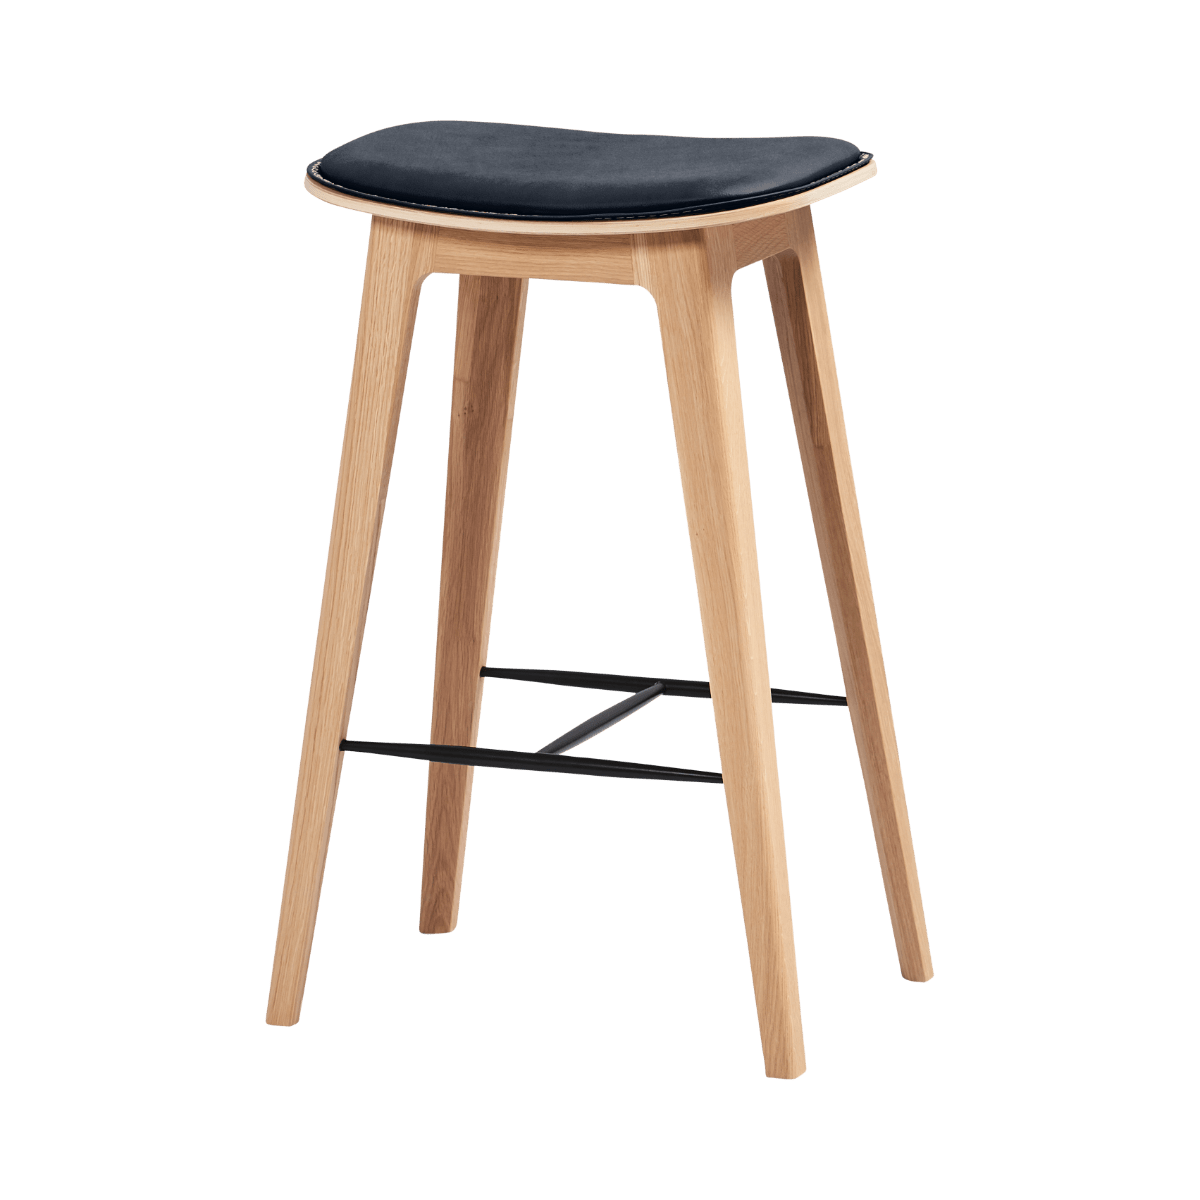 variant_8593225% | Nordic Bar Stool - Oak with stitches [Contract] - 68 cm Luna Carbon | SACKit